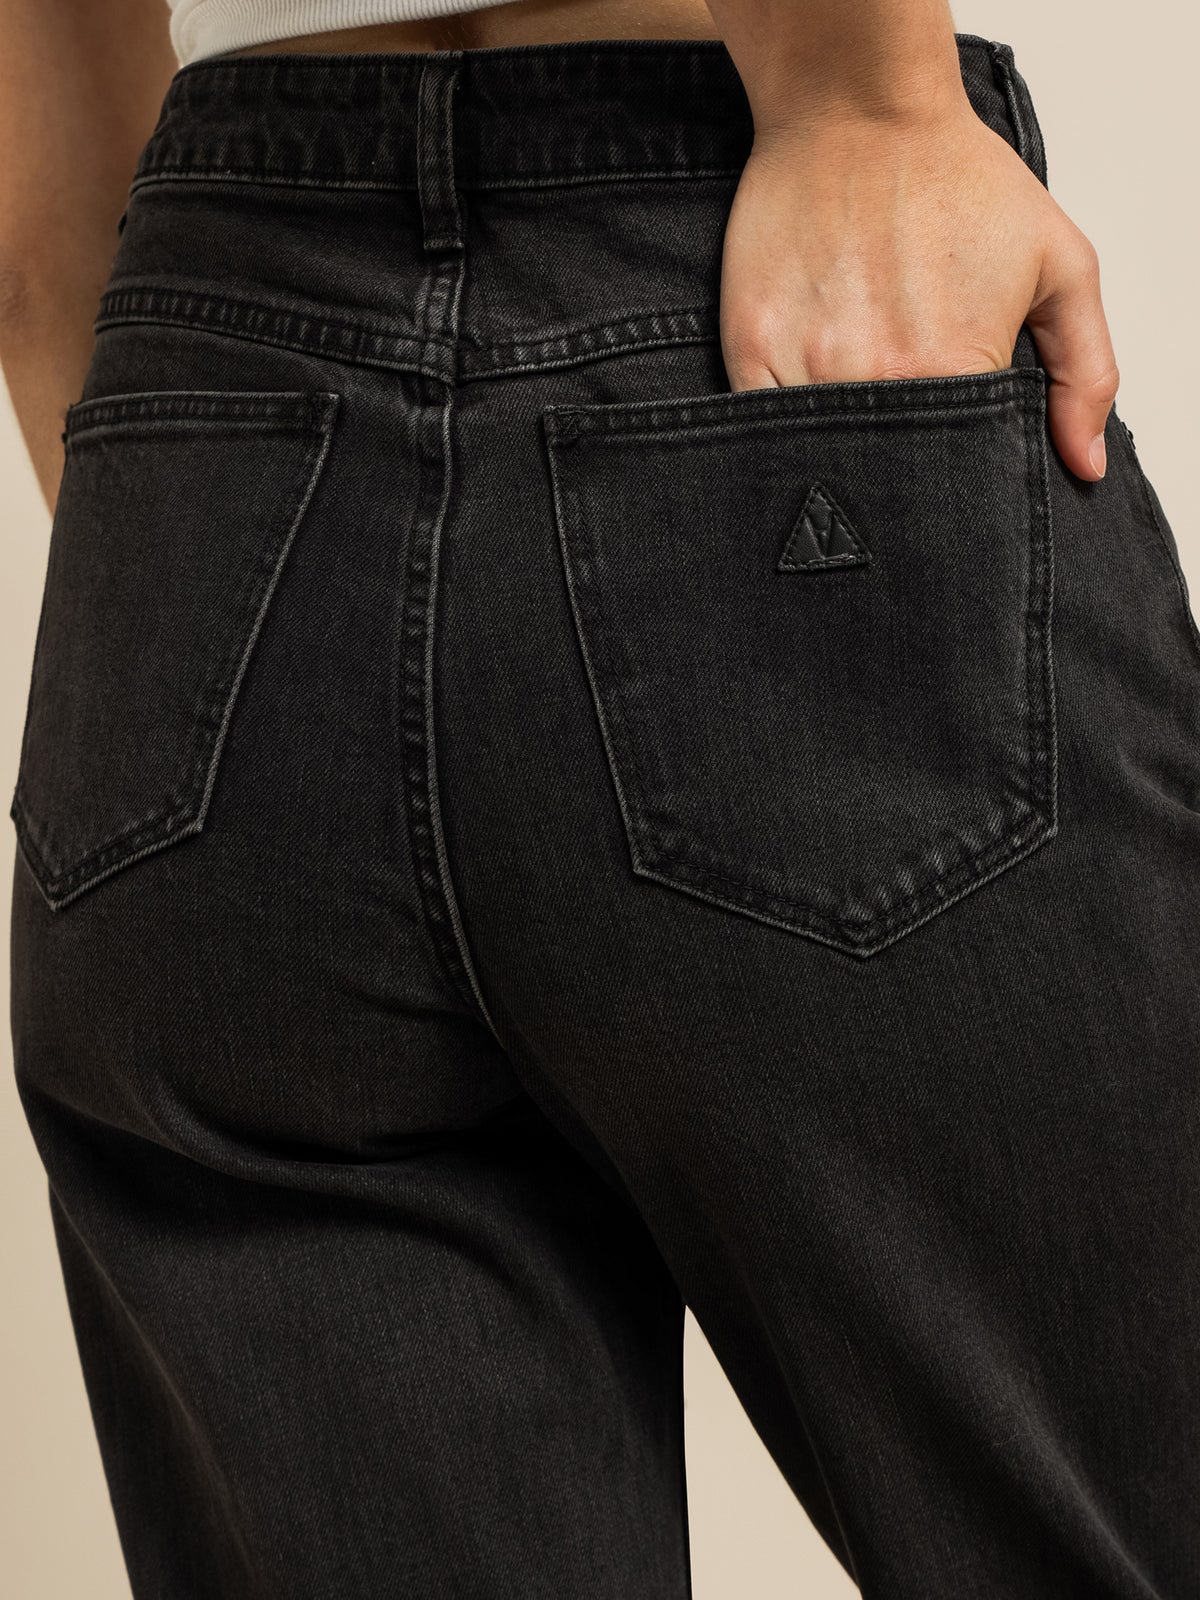 A 94 High Straight Jeans in Teri Black